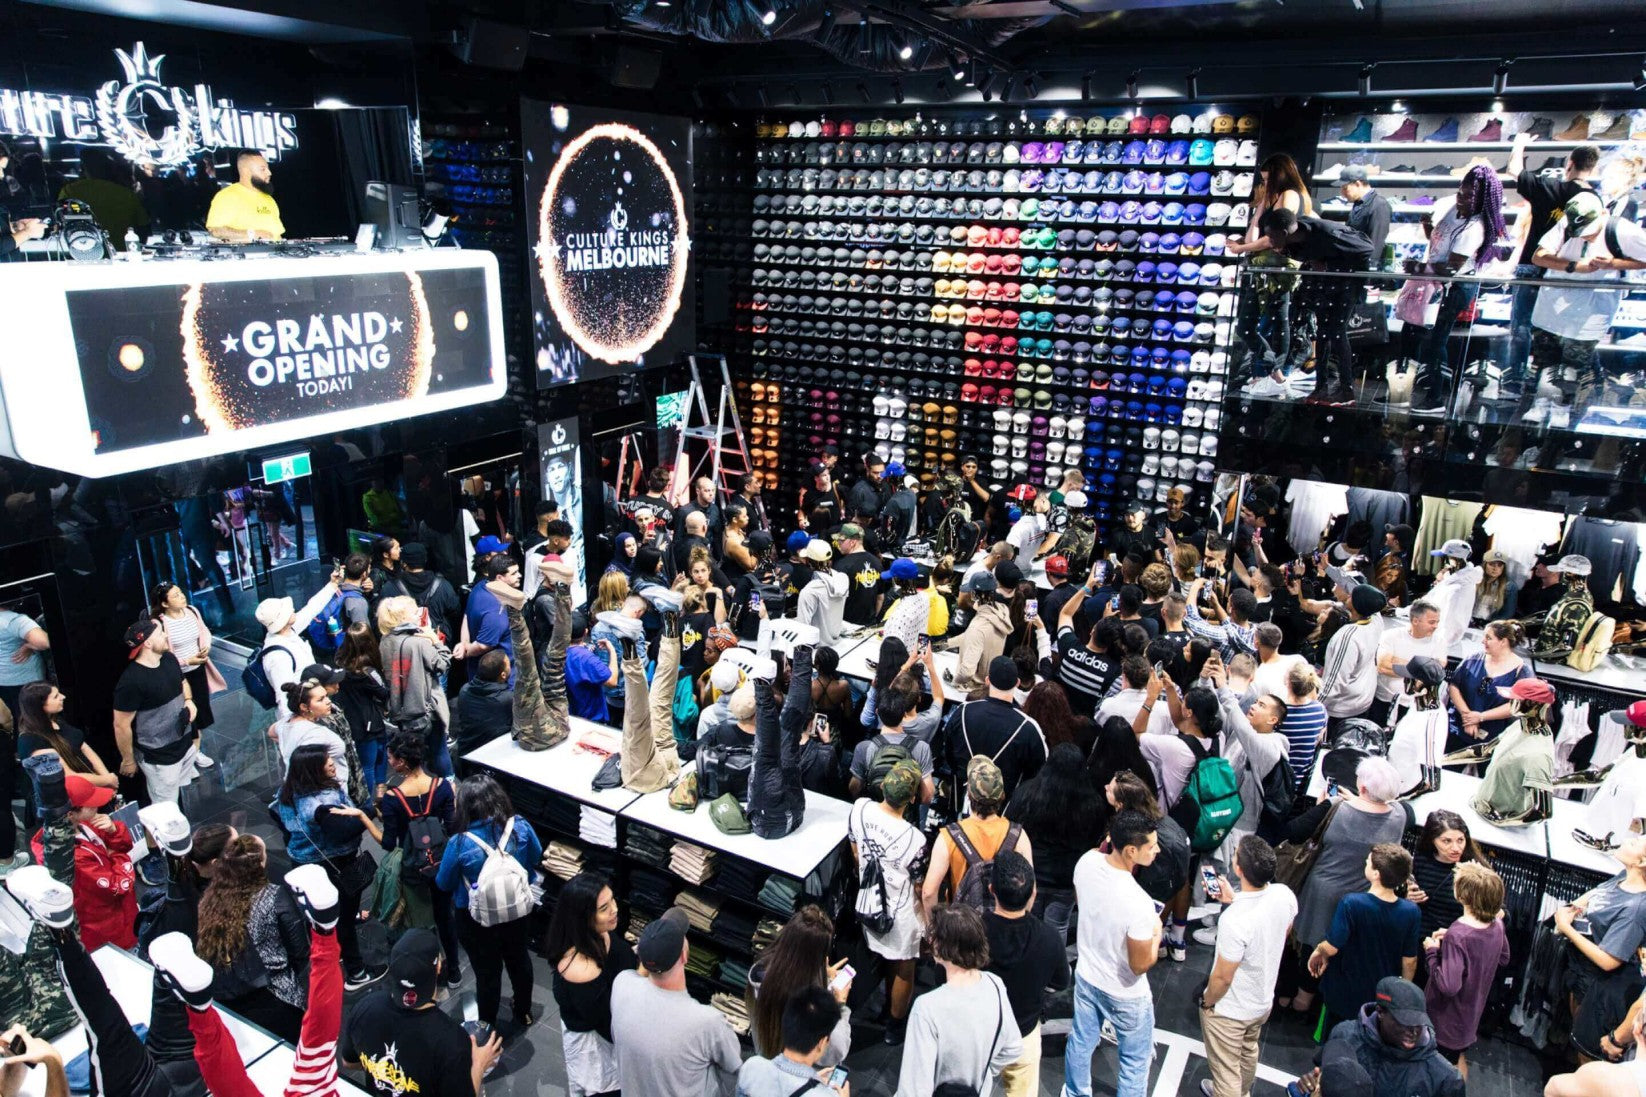 A rush of shoppers gathered inside the grand opening of the Culture Kings store in Melbourne.